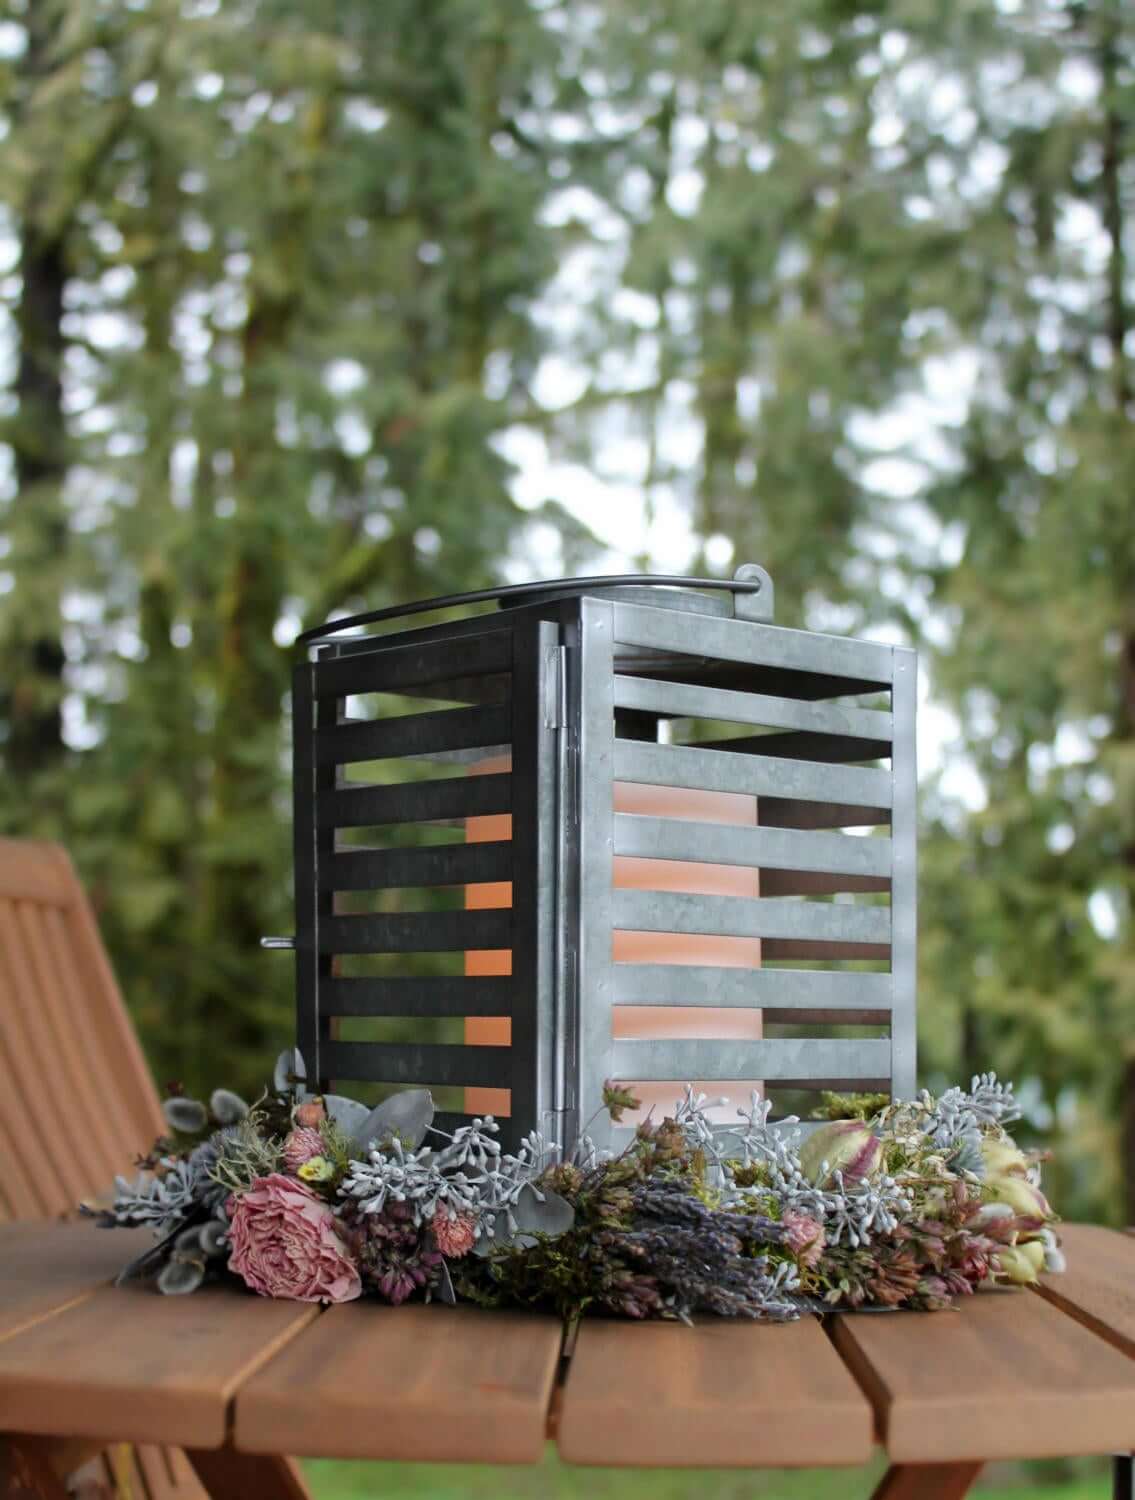 Awesome Idea for Rustic Romance with Metal Elements